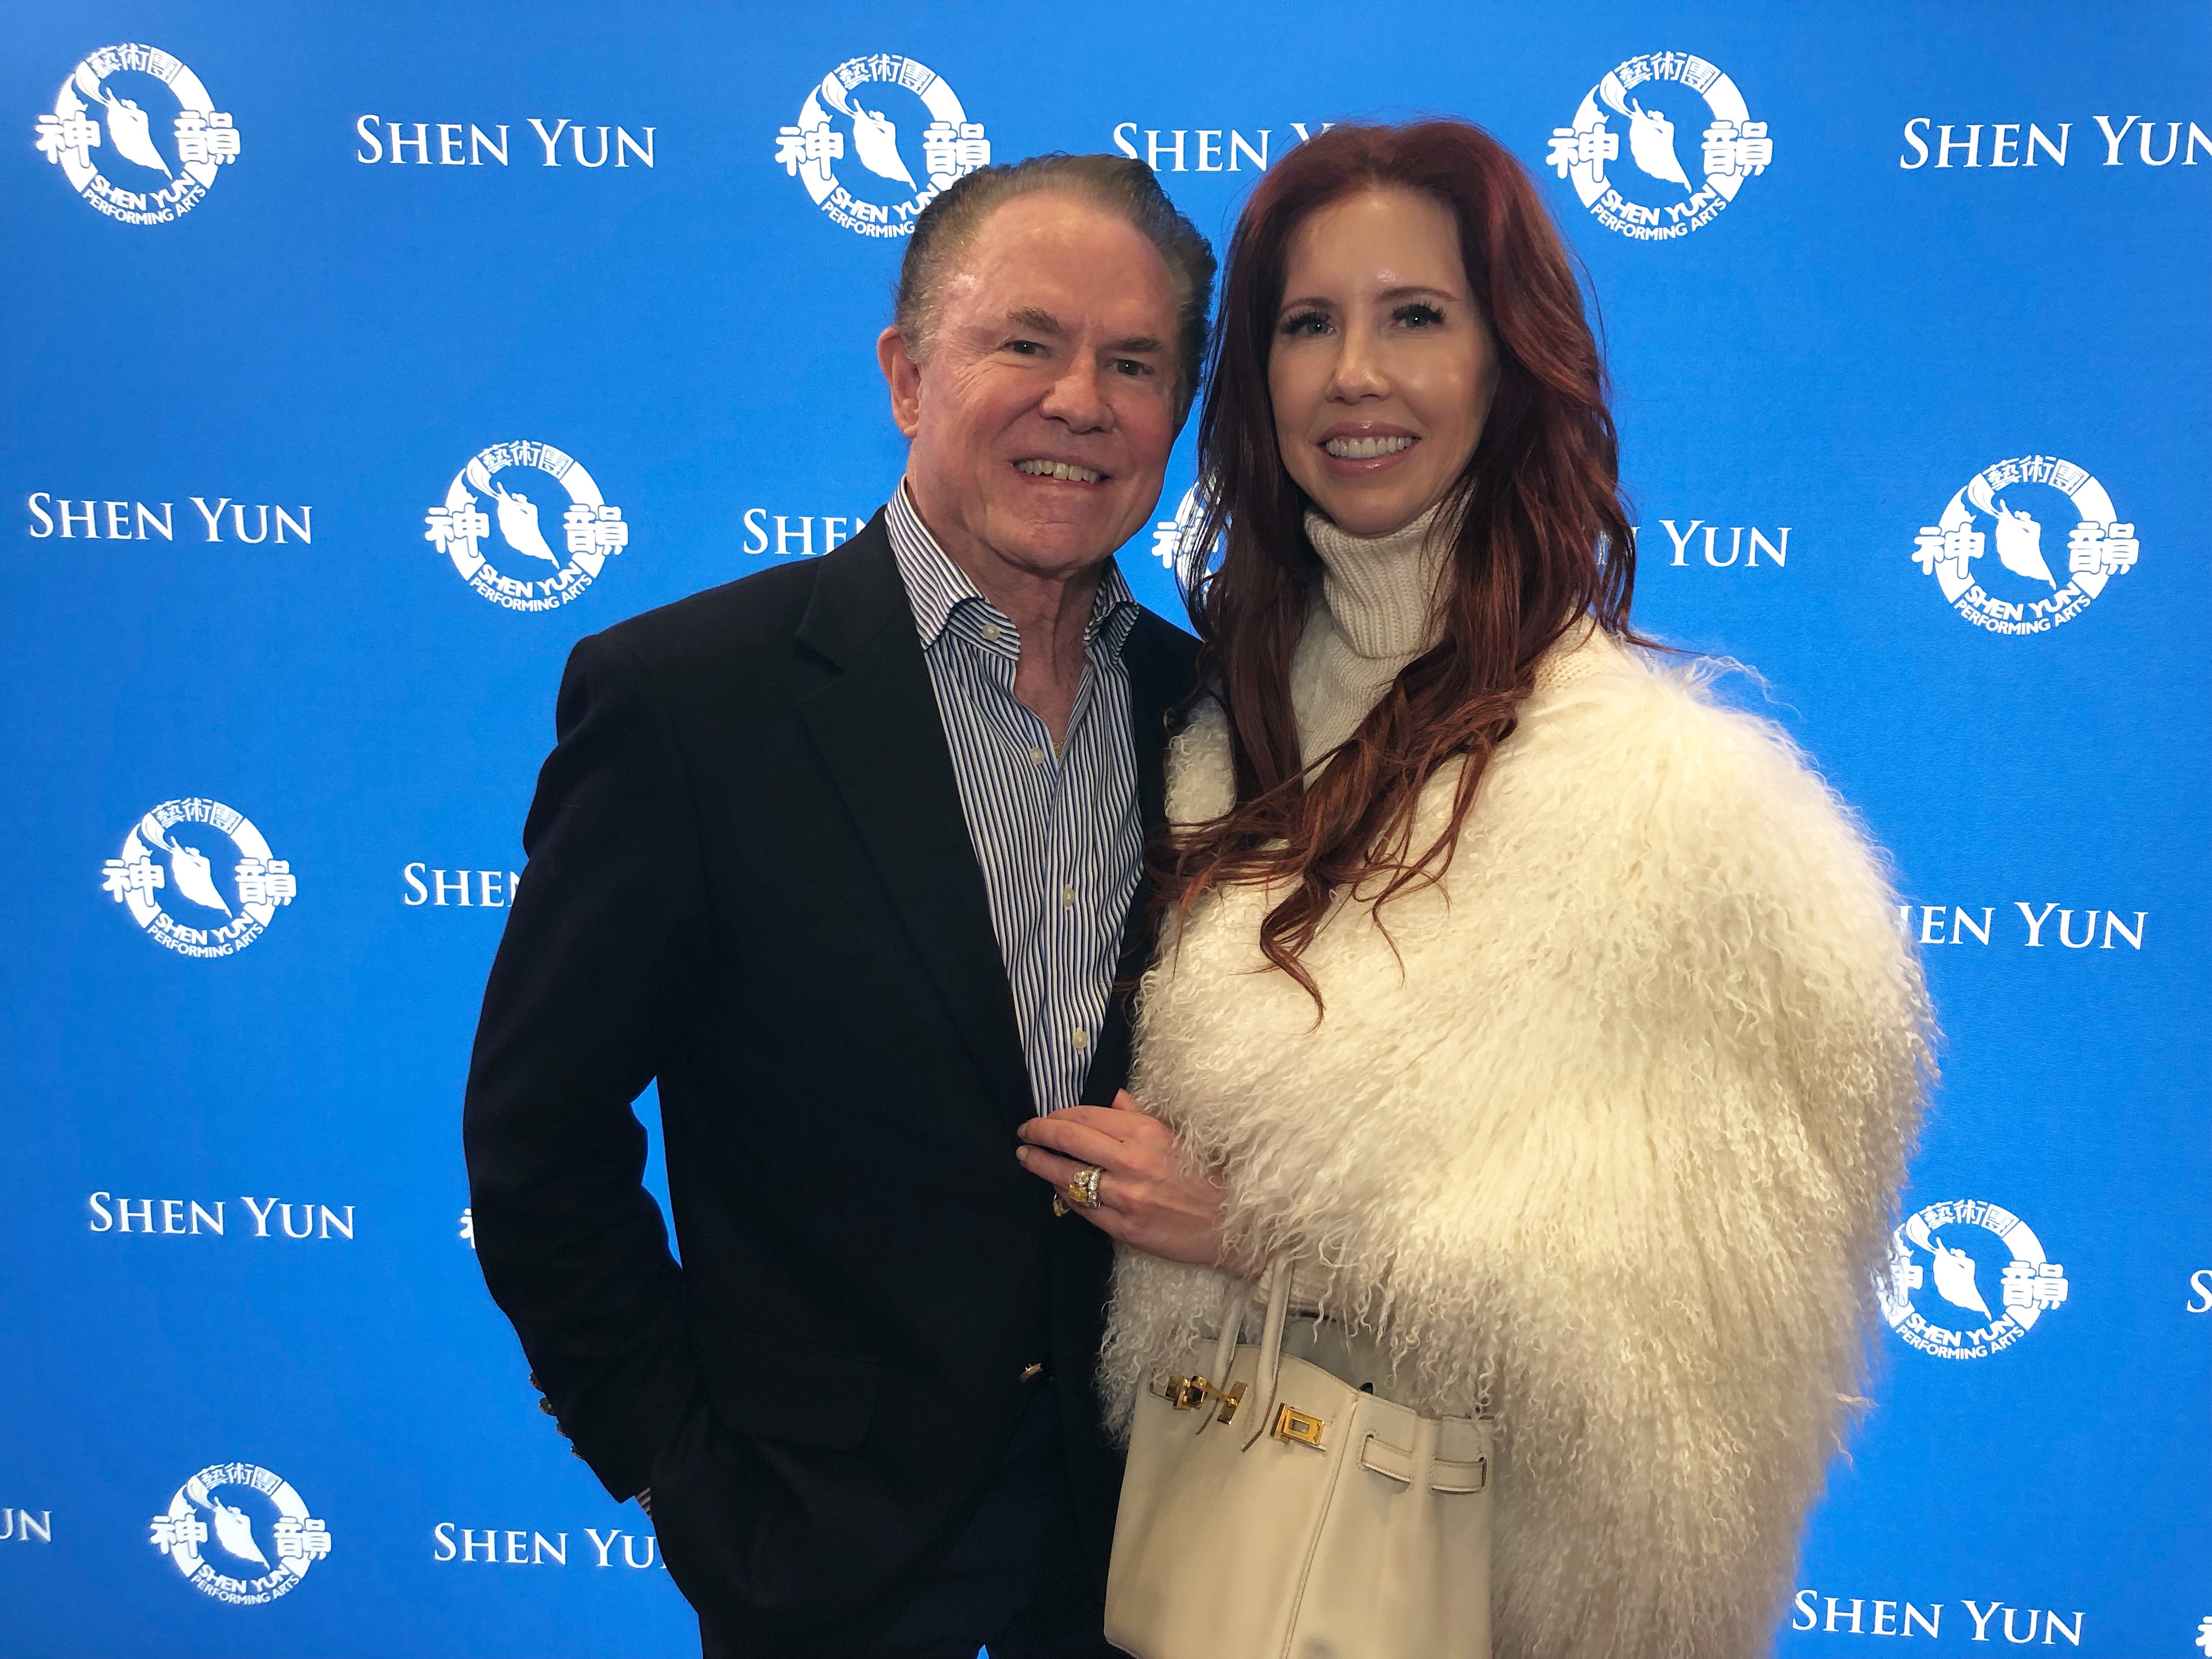 This Is An Expression Of Freedom Richard J Stephenson And Dr Stacie J Stephenson Attended A Shen Yun Performance In Phoenix Richard J Stephenson